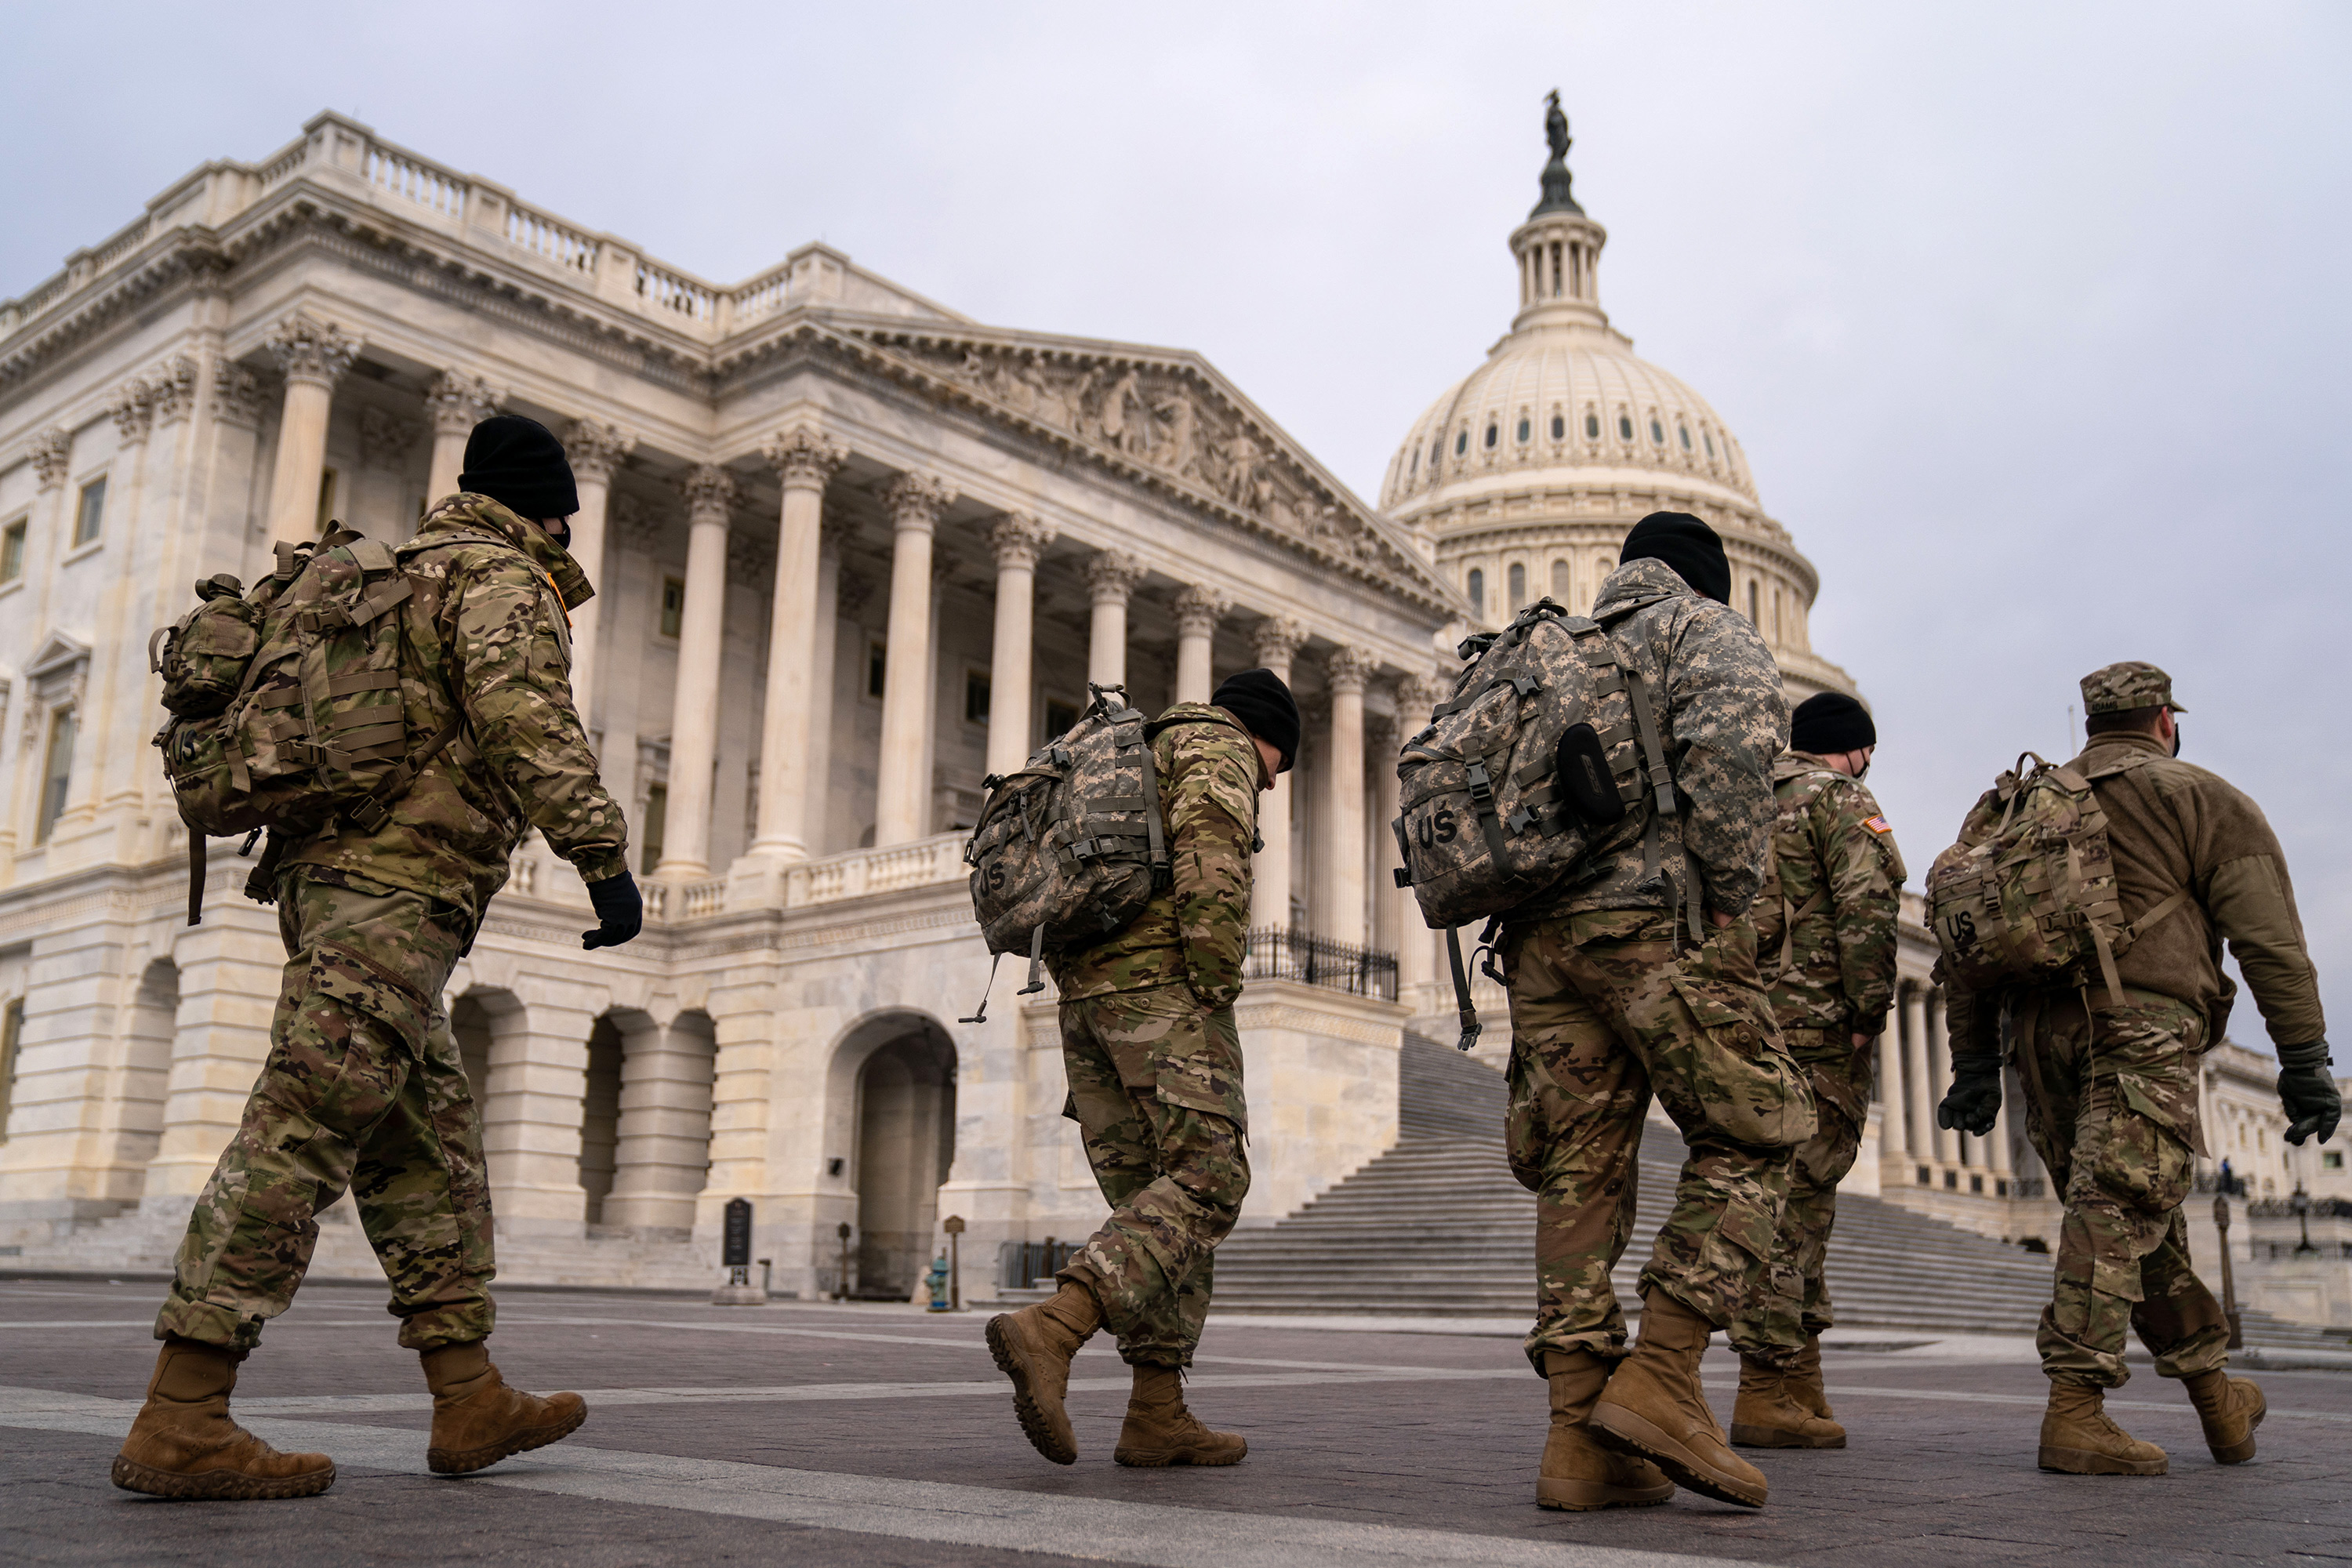 National Guard members are seen outside the US Capitol building on Monday, January 11 in Washington, DC.